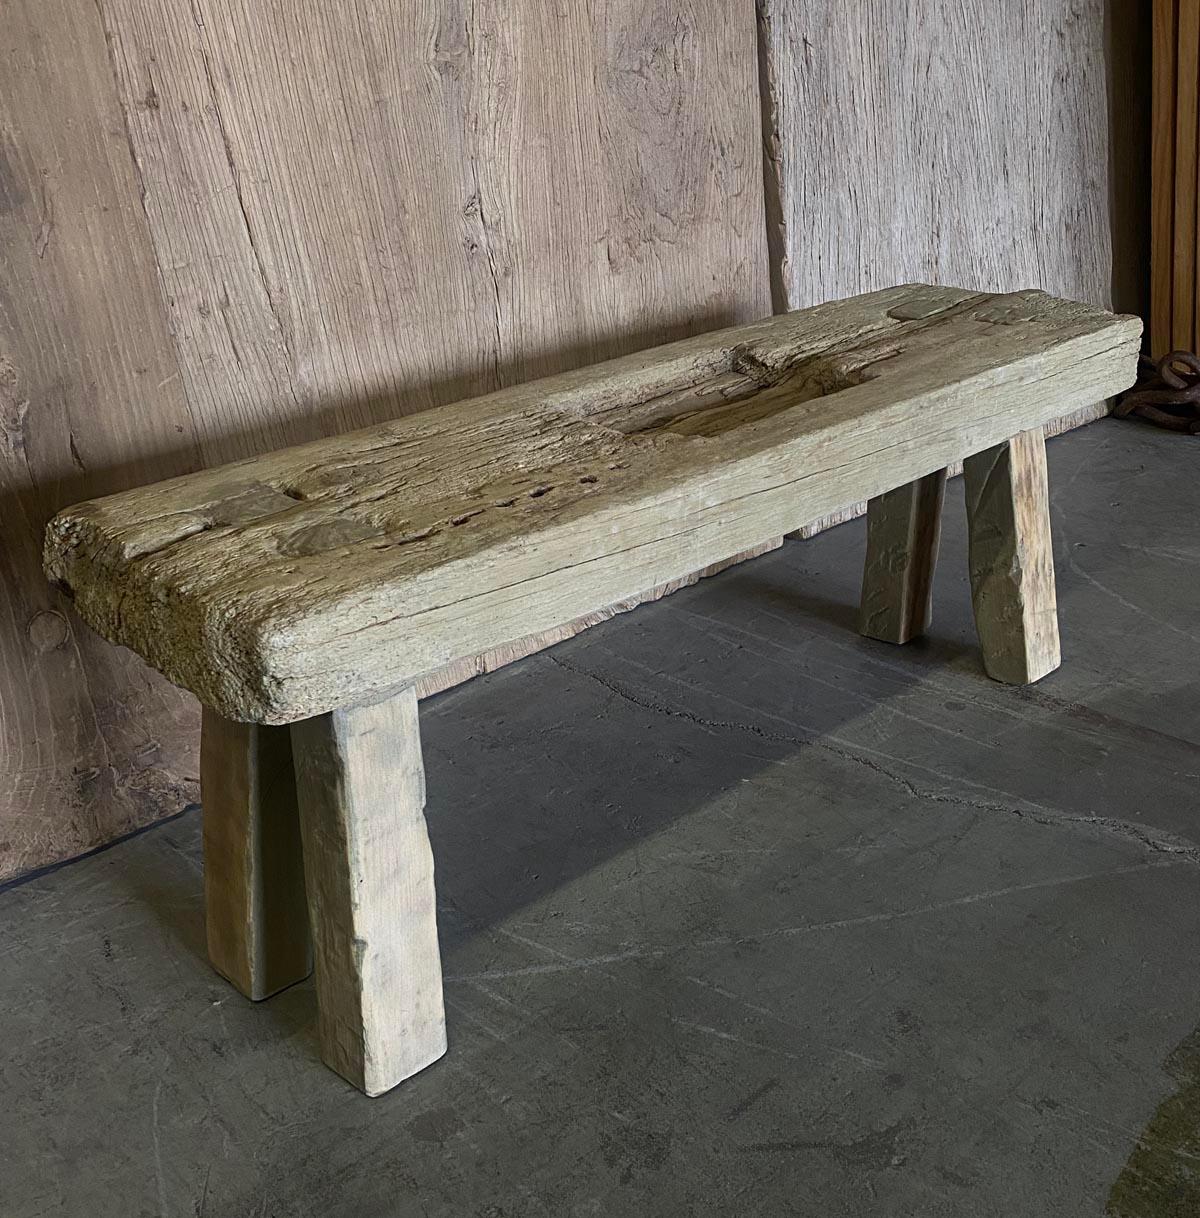 Rustic antique batea (tray) from Guatemala, with added legs, mortise and tenon construction. Natural finish. The top measures 3.5 inches.
Also has a sibling! See photos.